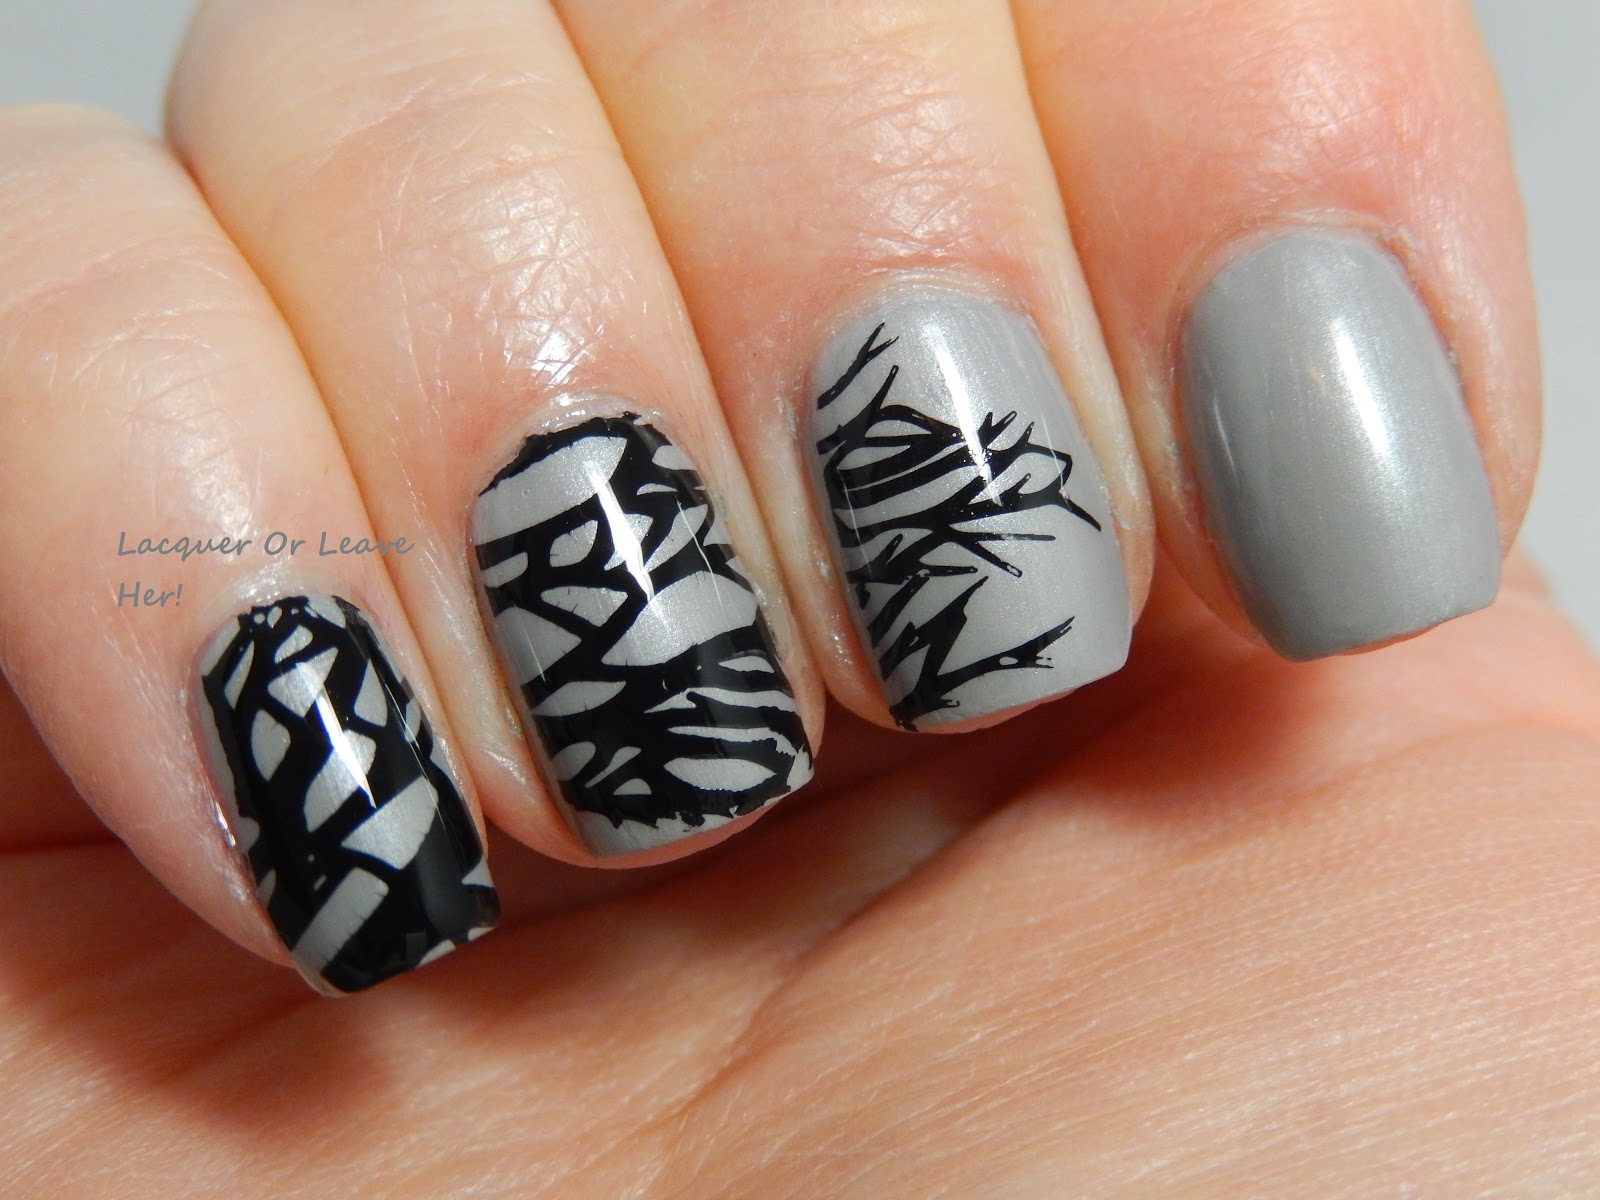 Lacquer or Leave Her!: Review, test, & Manicure: MoYou London Suki 10 ...